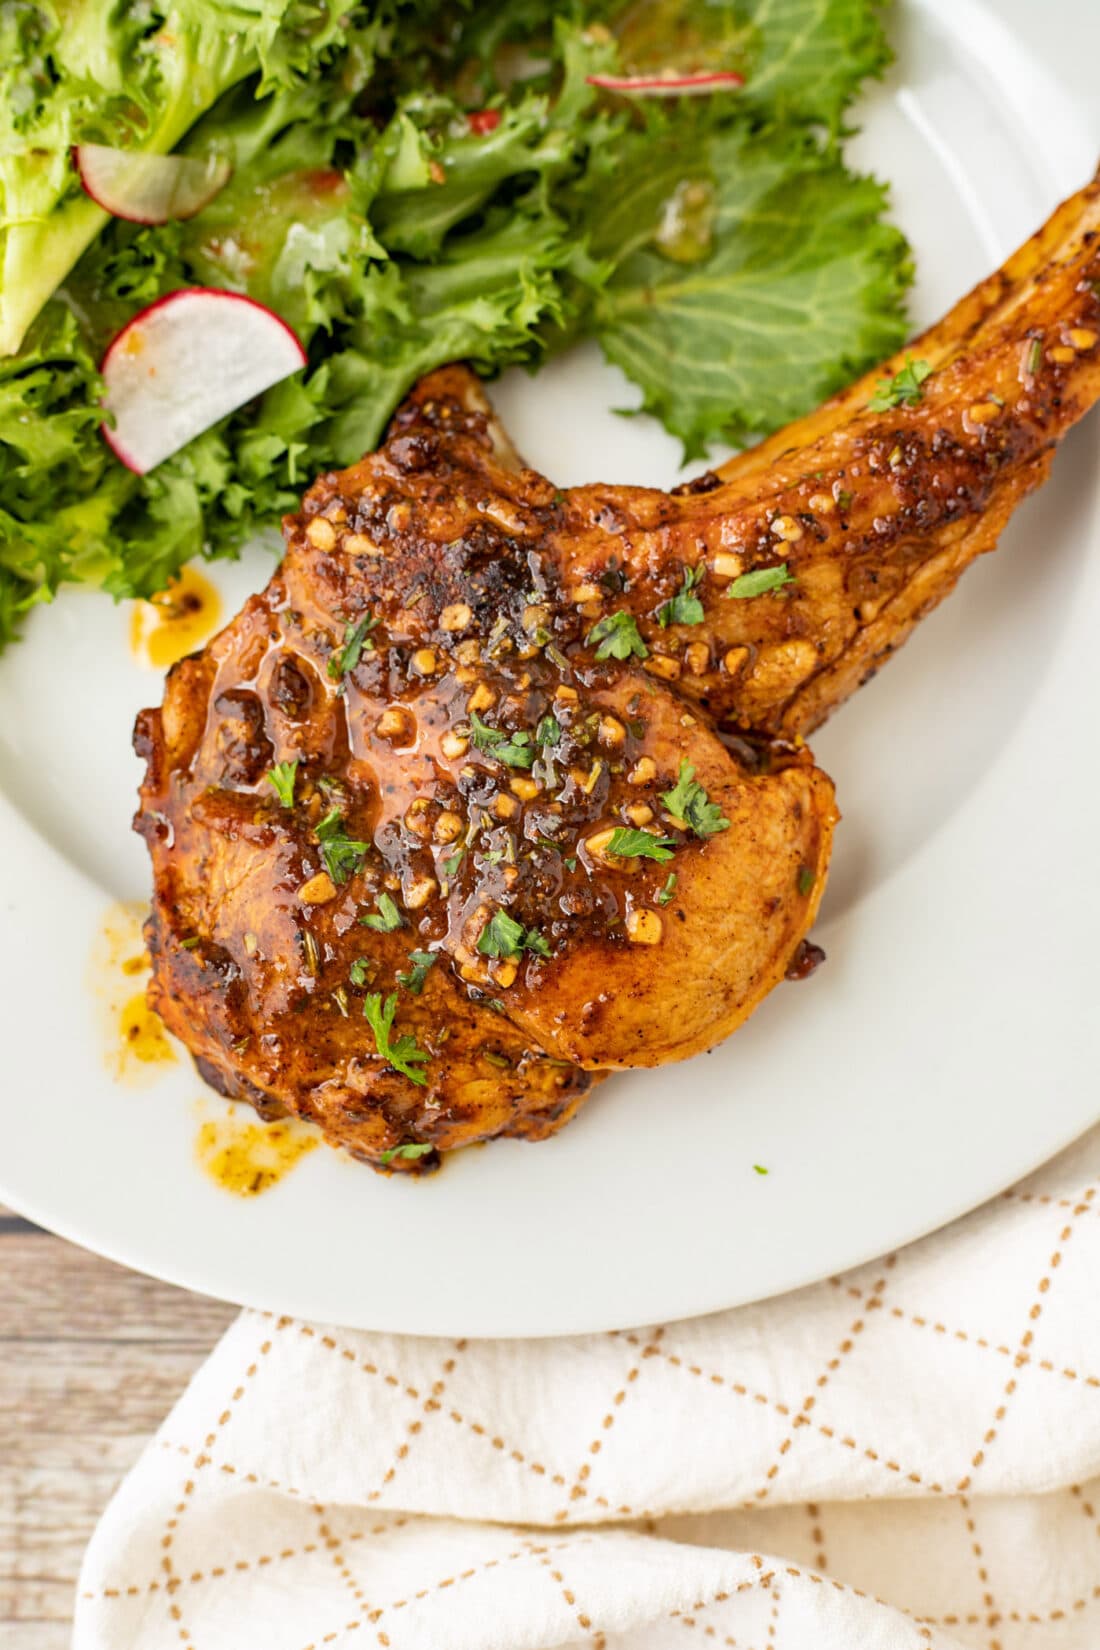 Veal Chop on a plate with salad